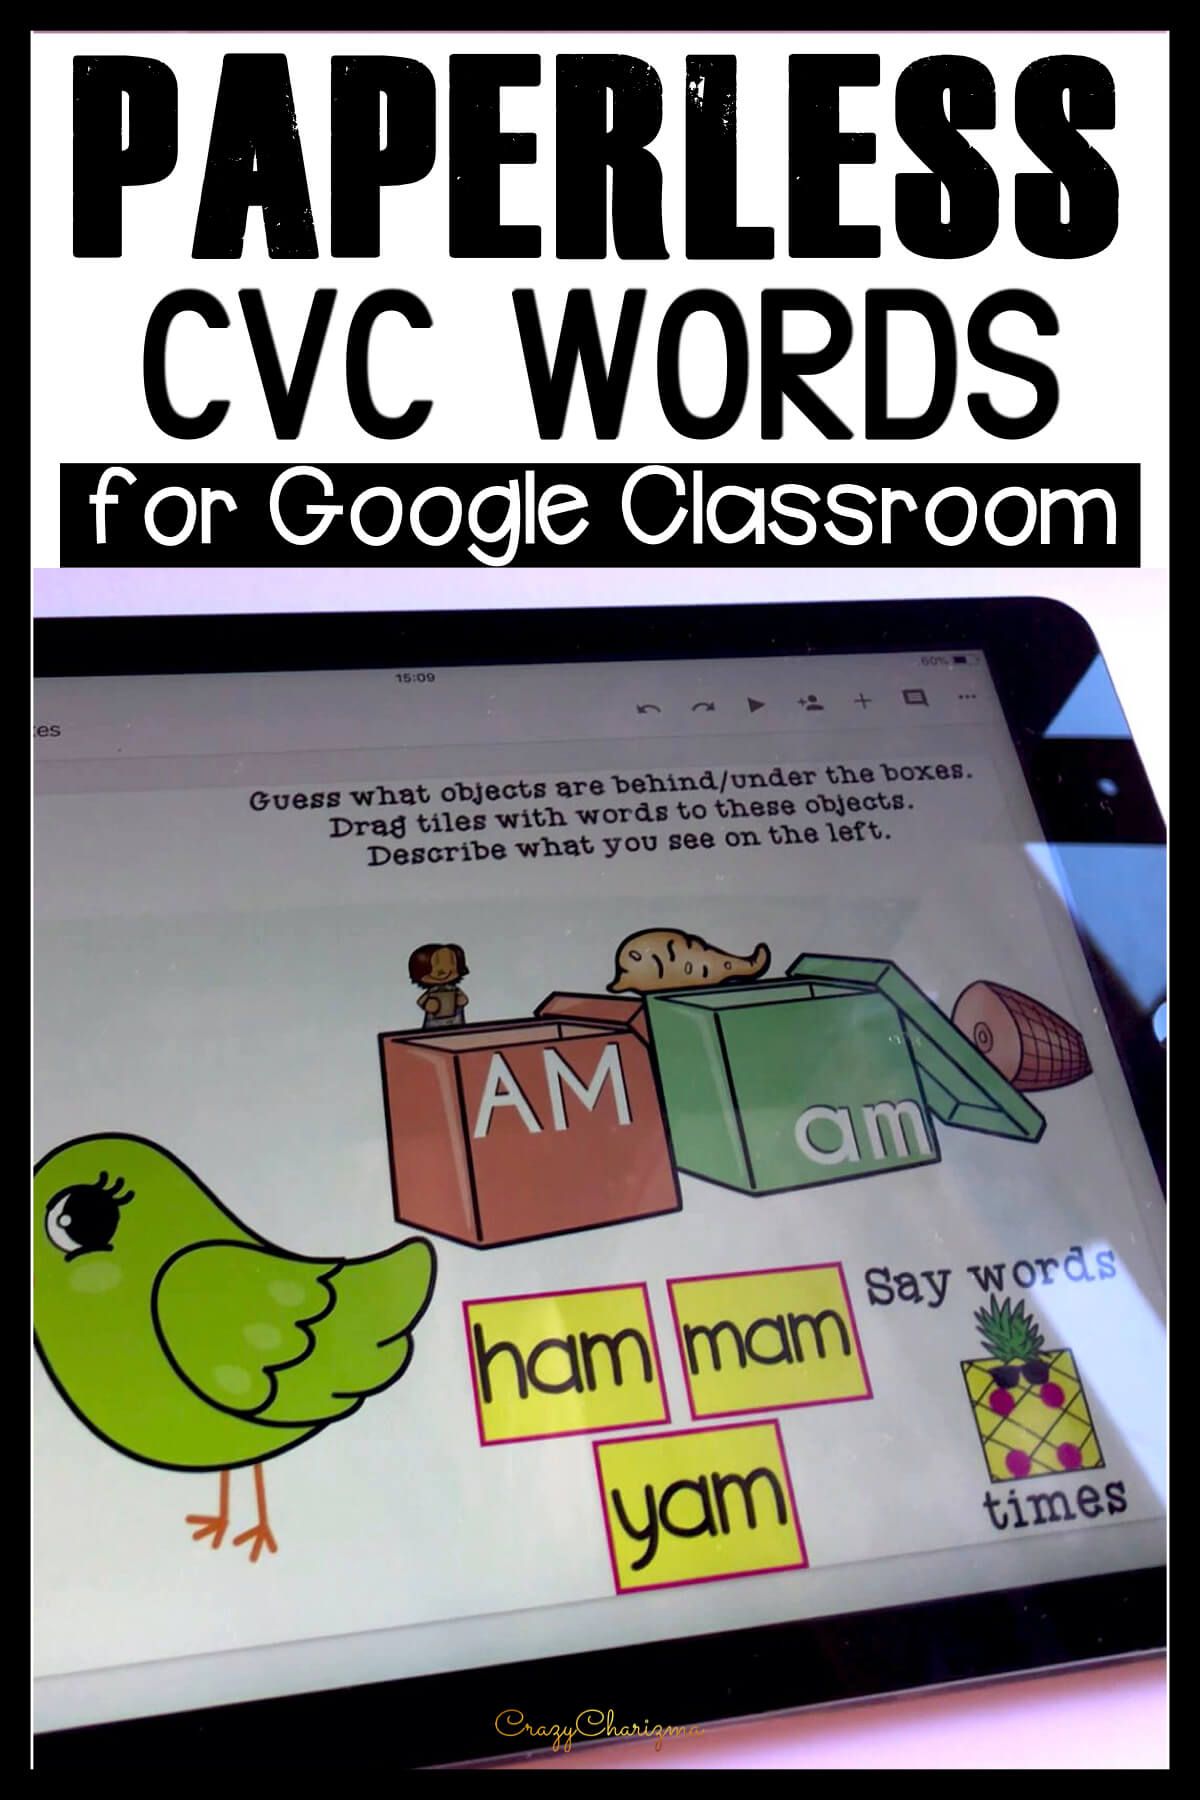 Looking for NO PREP paperless activities to practice CVC words? I've got you covered! Practice word work, words sentences, and read fluency passages. Google Classroom for kindergarten can be fun!